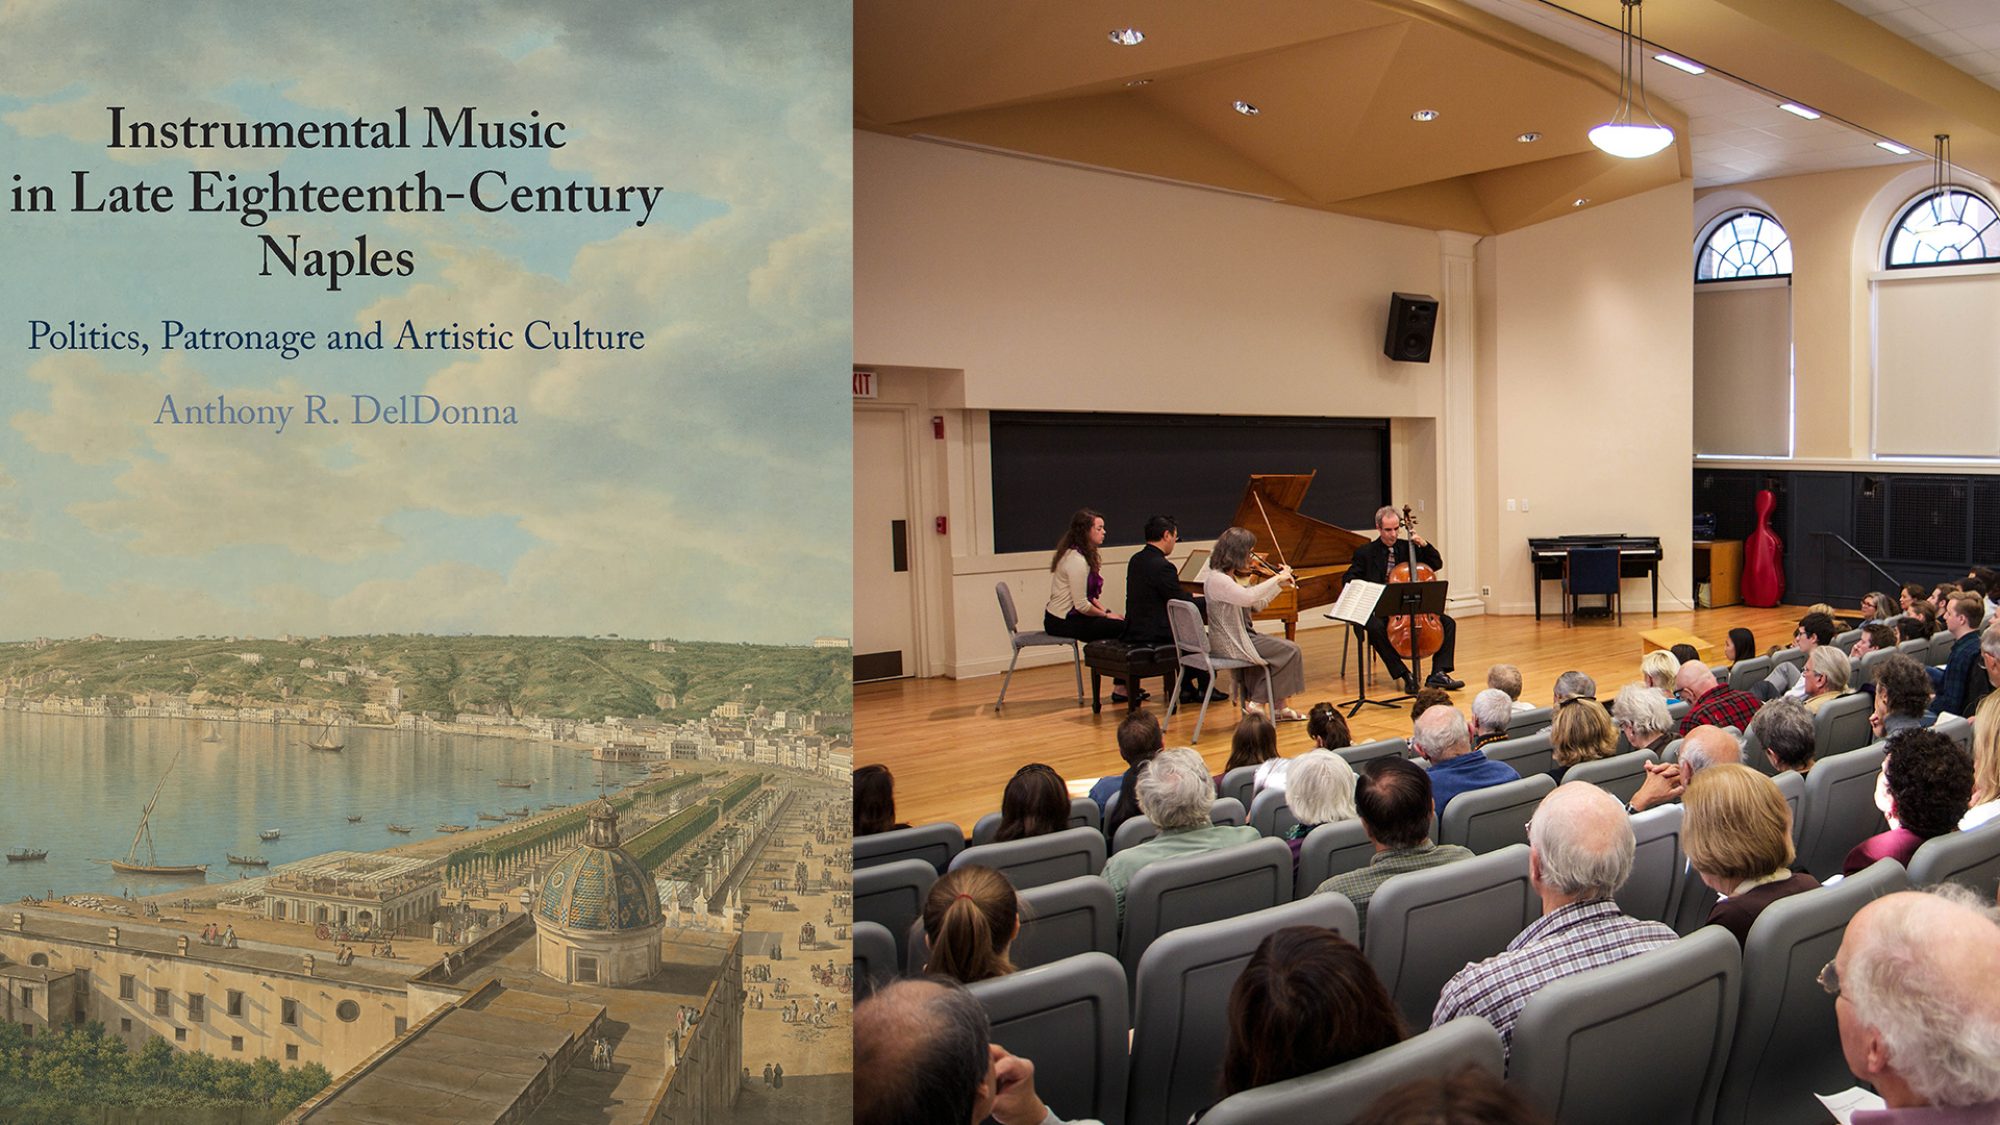 Book cover showing Naples skyline at left, and at right, photo of early music ensemble Modern Musick performing with violin, cello, and harpsichord.